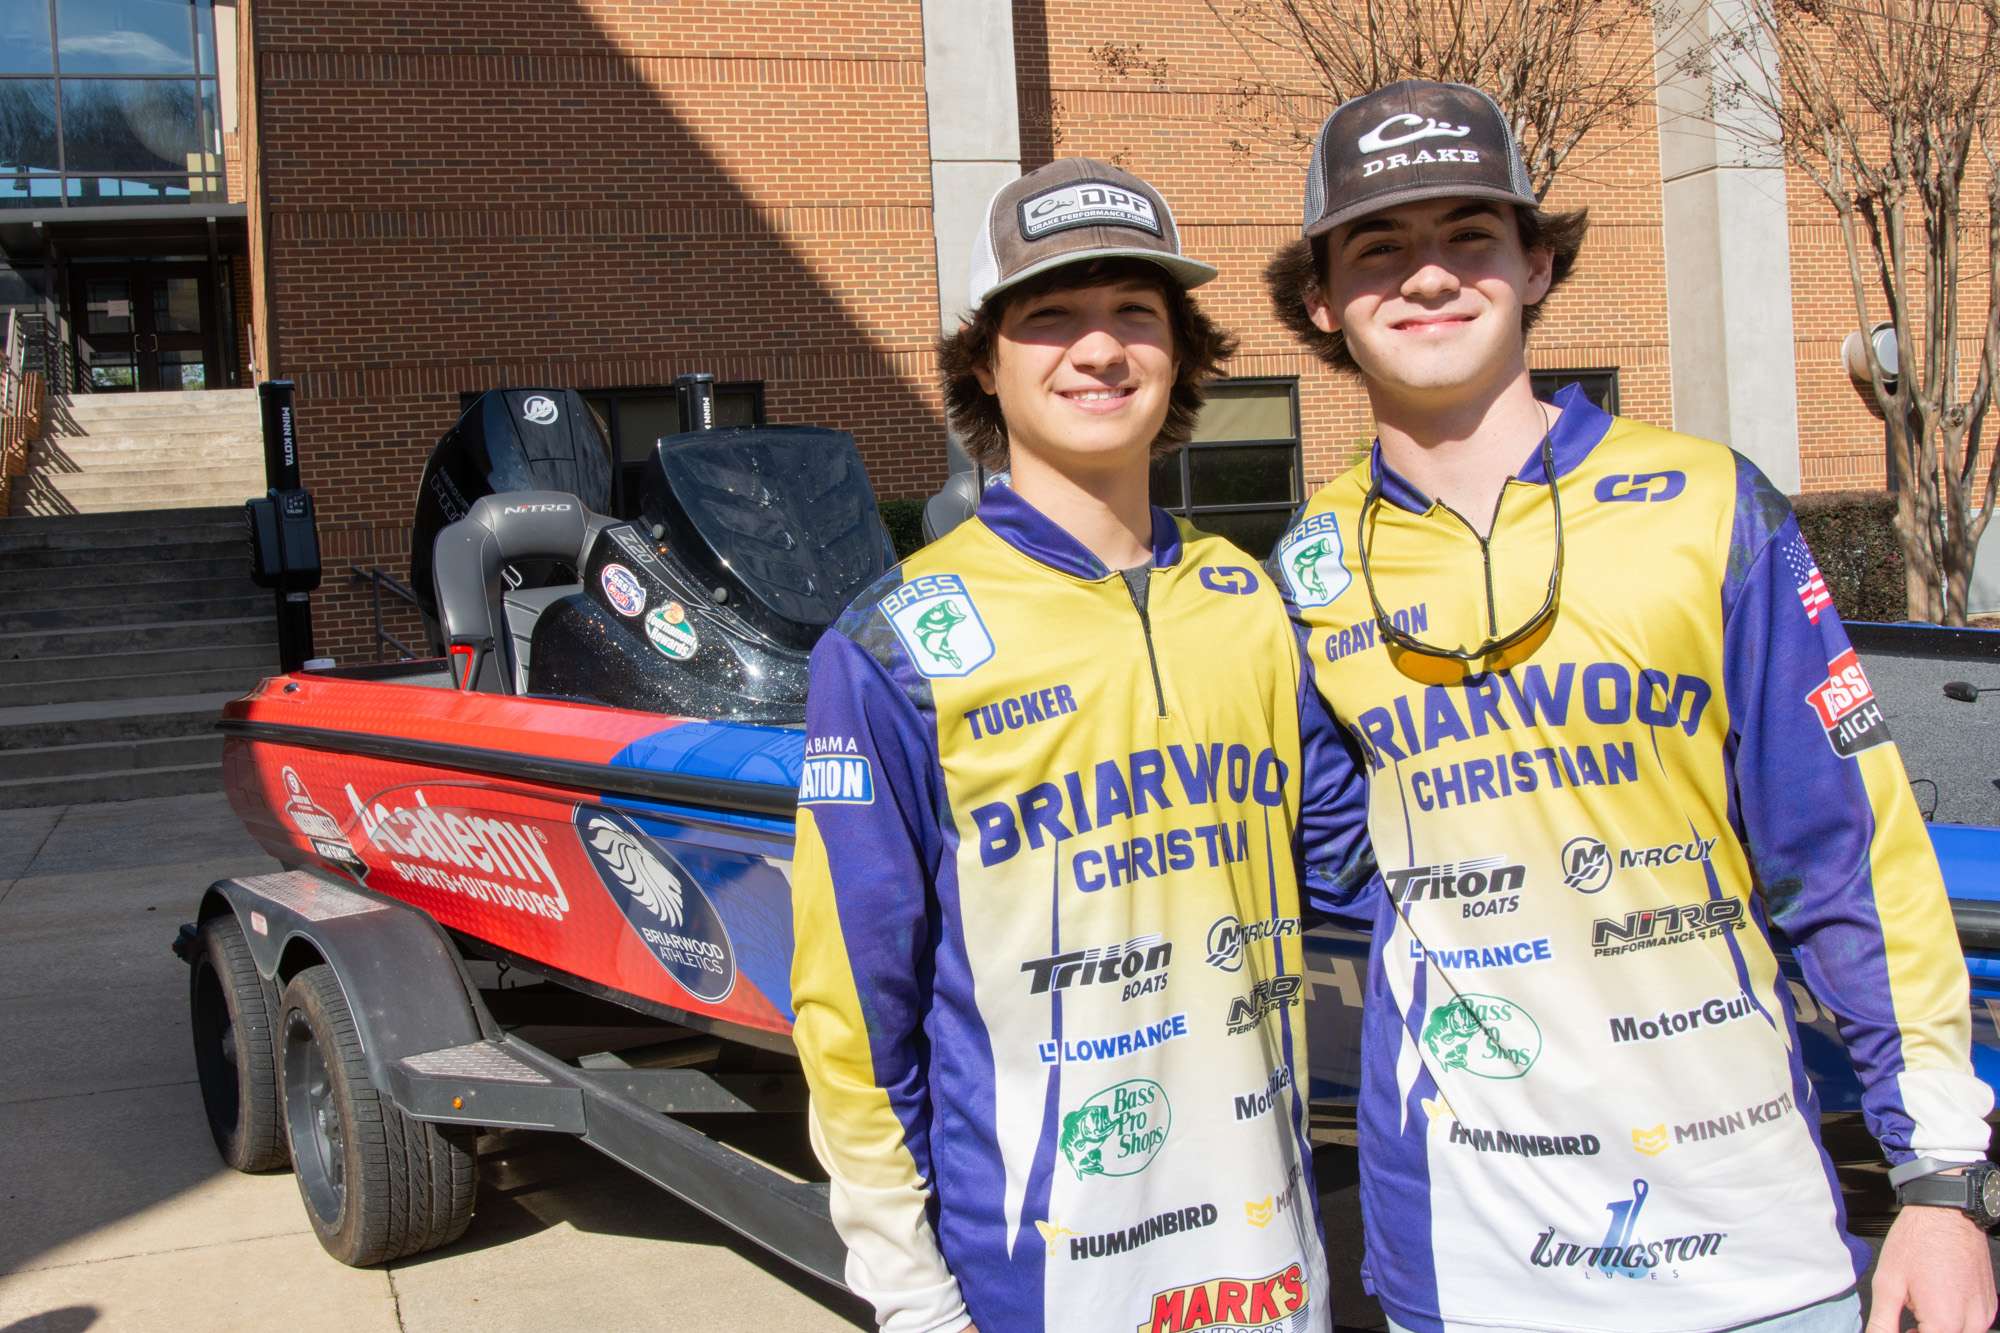 Tucker and Grayson stand in front of their newly wrapped boat, which they will have the opportunity to show off at the 2020 Academy Sports + Outdoors Bassmaster Classic in March!